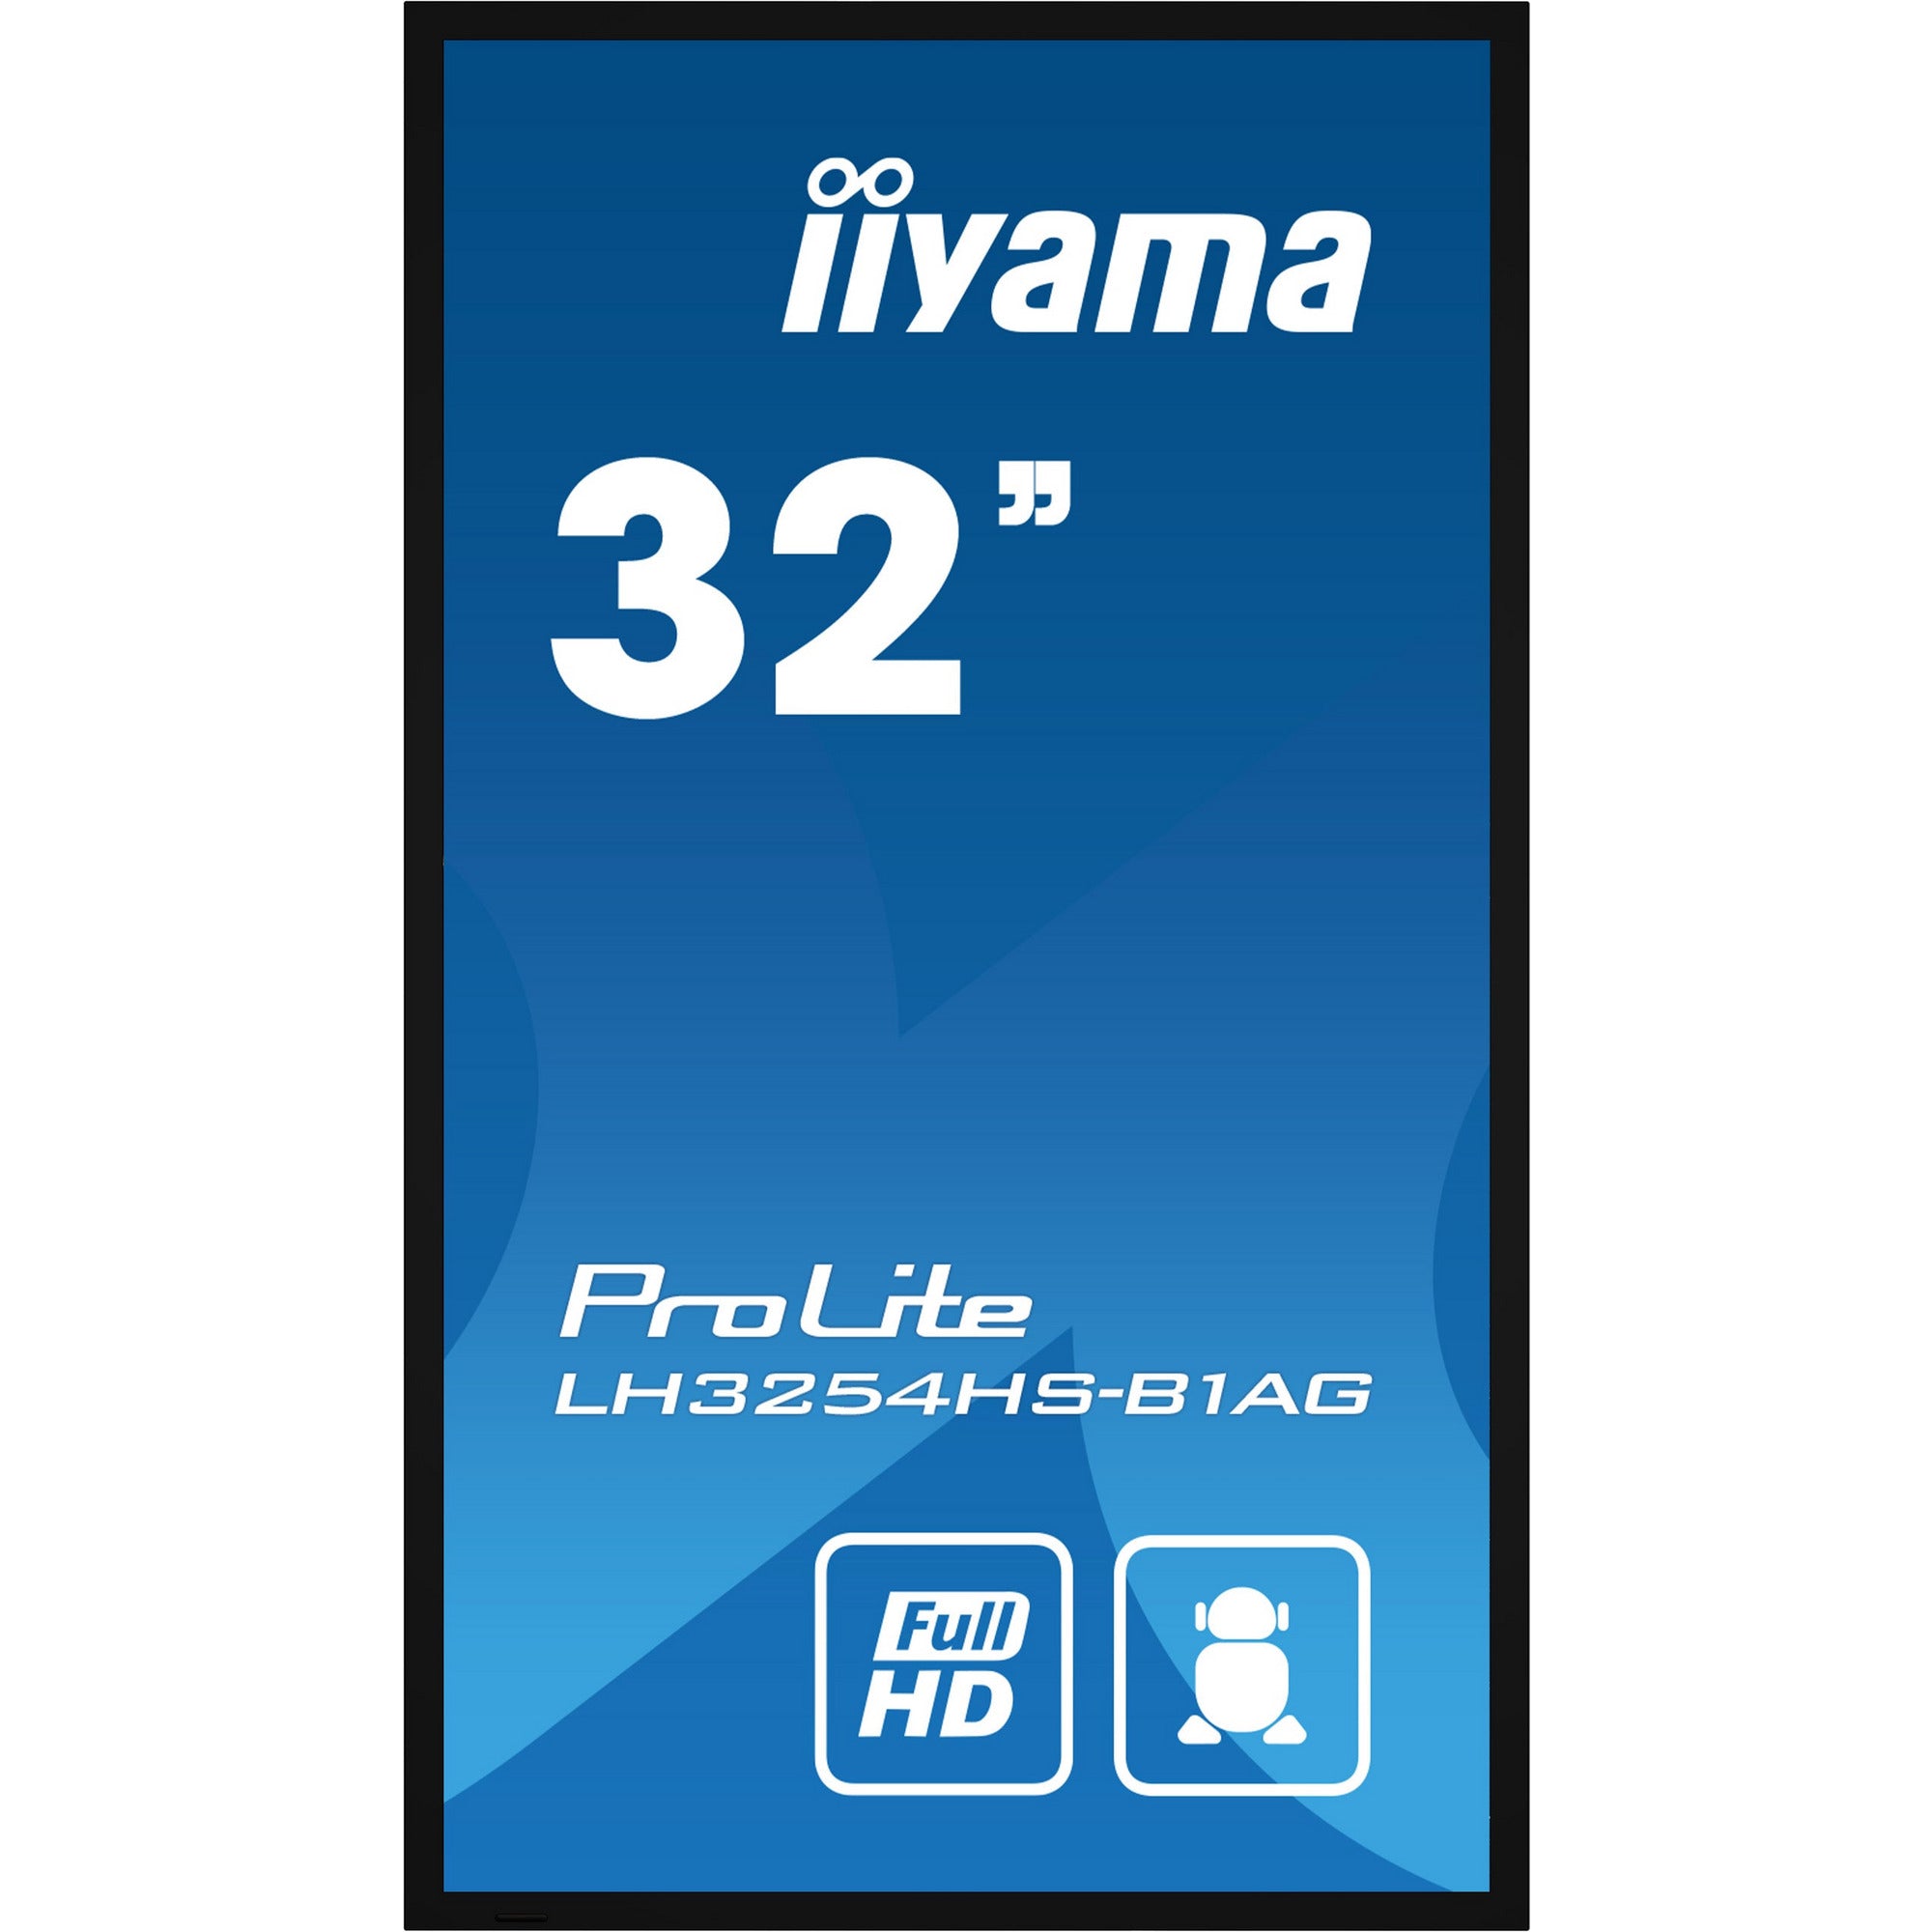 Iiyama ProLite LH3254HS-B1AG 32" Full HD Professional Digital Signage 24/7 Display featuring Android OS and FailOver